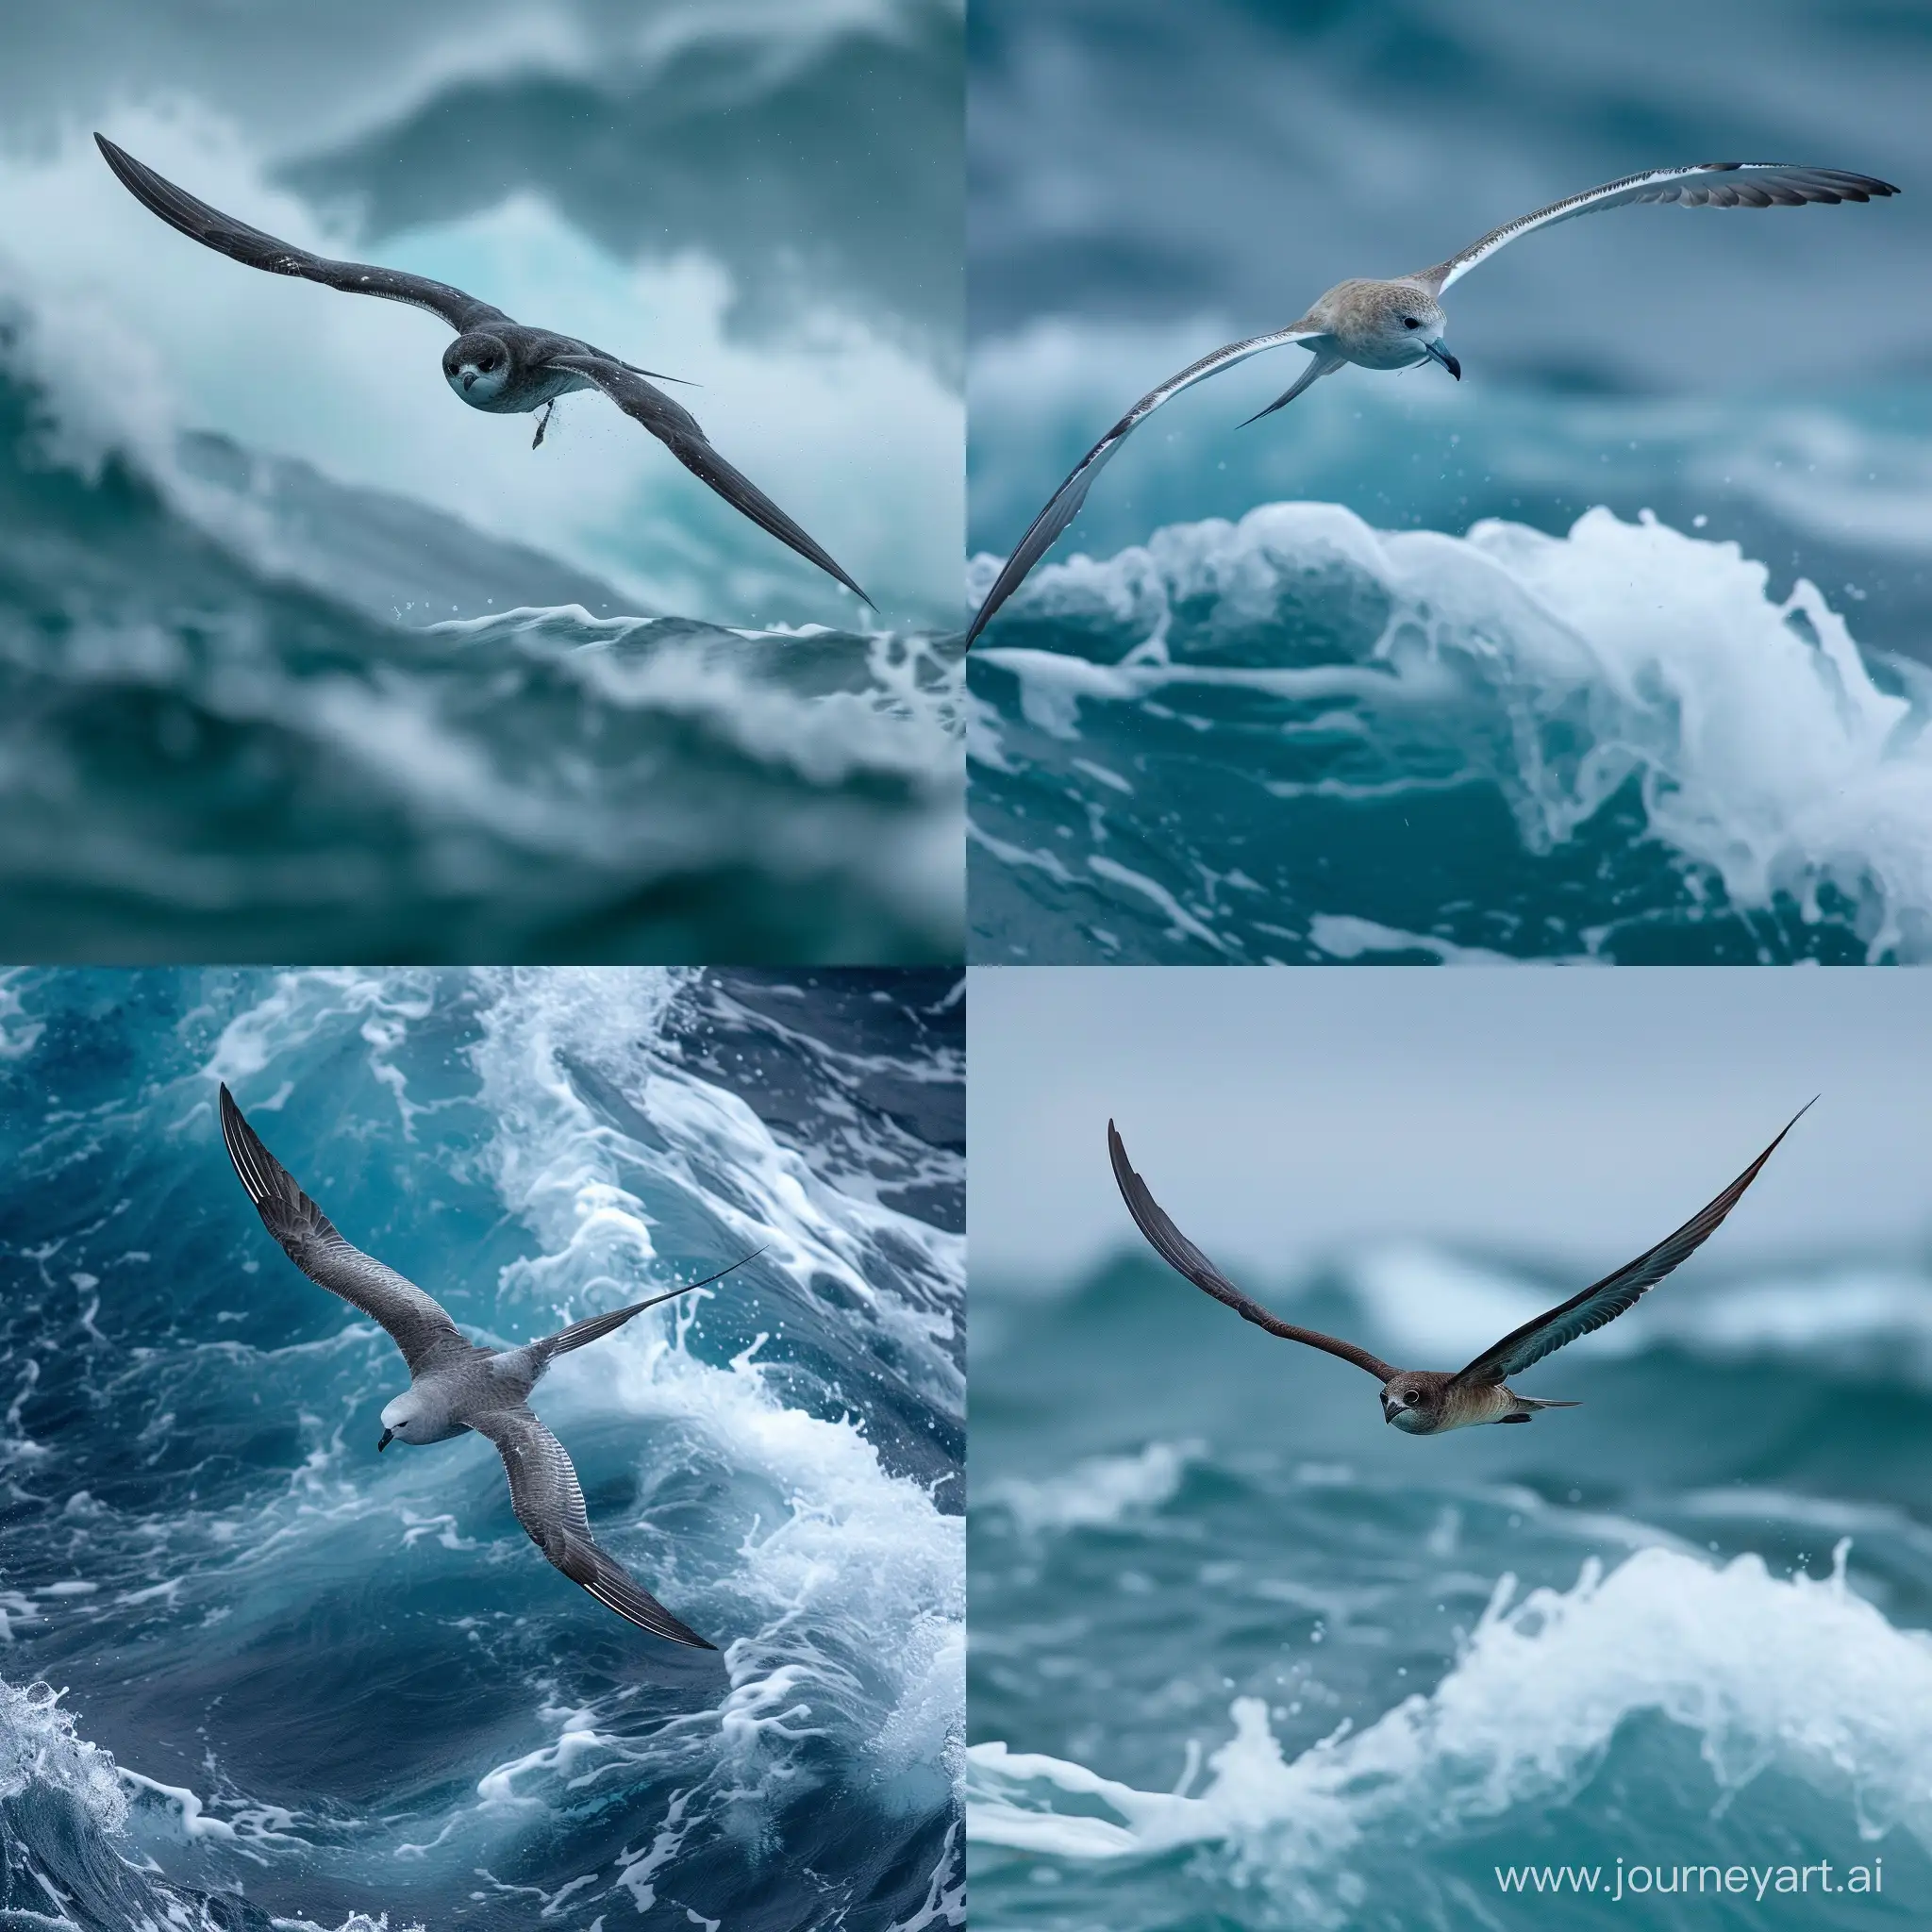 award winning wildlife photo of a 6 inch long seabird with a 15 foot wingspan, gliding over choppy ocean waves, canon camera, supertelephoto lens, dramatic, crisp, Frans Lanting, nature documentary, entire bird in frame, ridiculous wingspan proportion, super tiny body with meter long wings